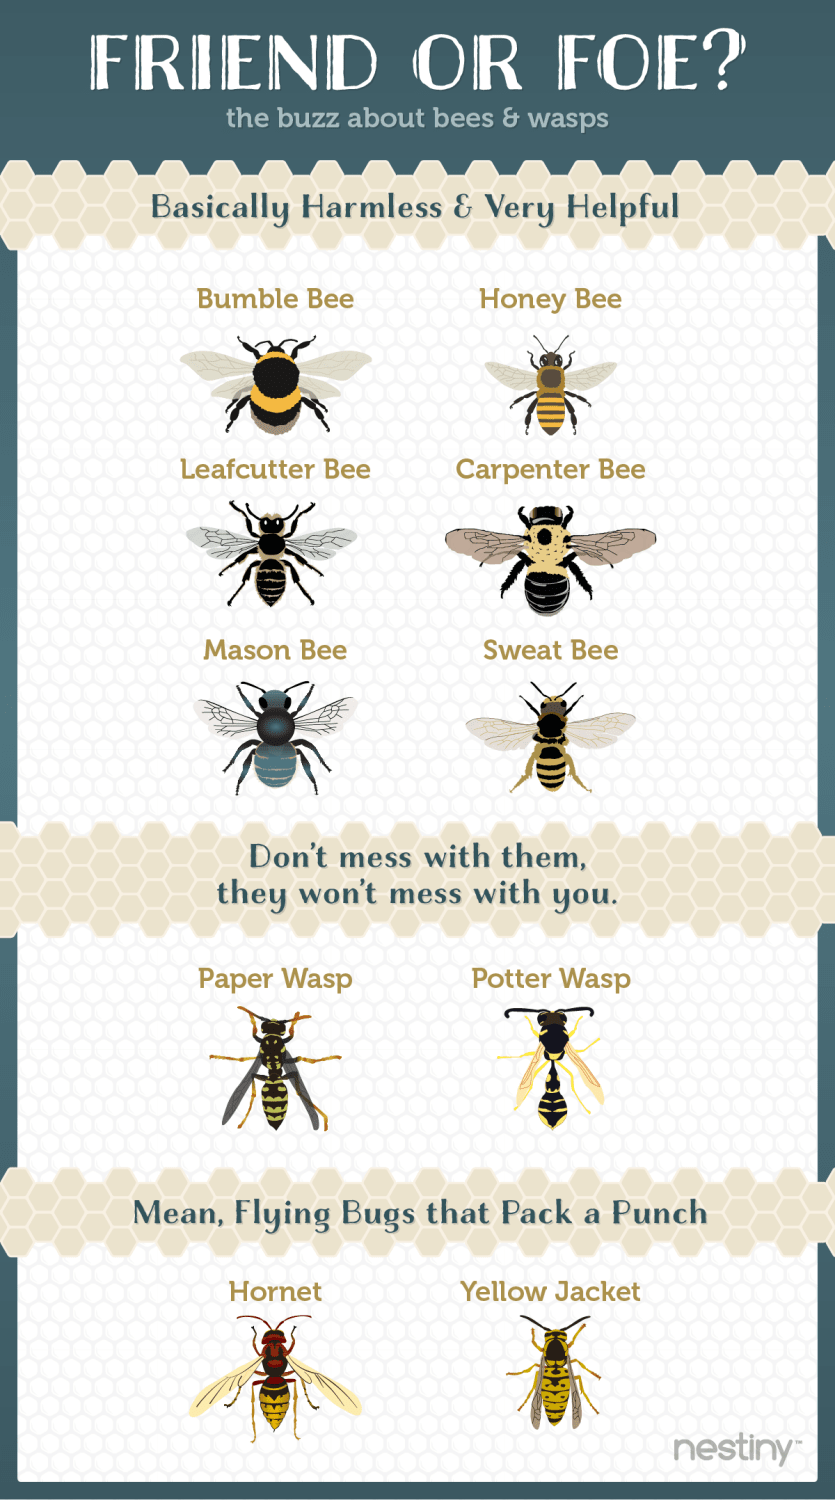 Friend or Foe -A Simple guide to Bees and Wasps